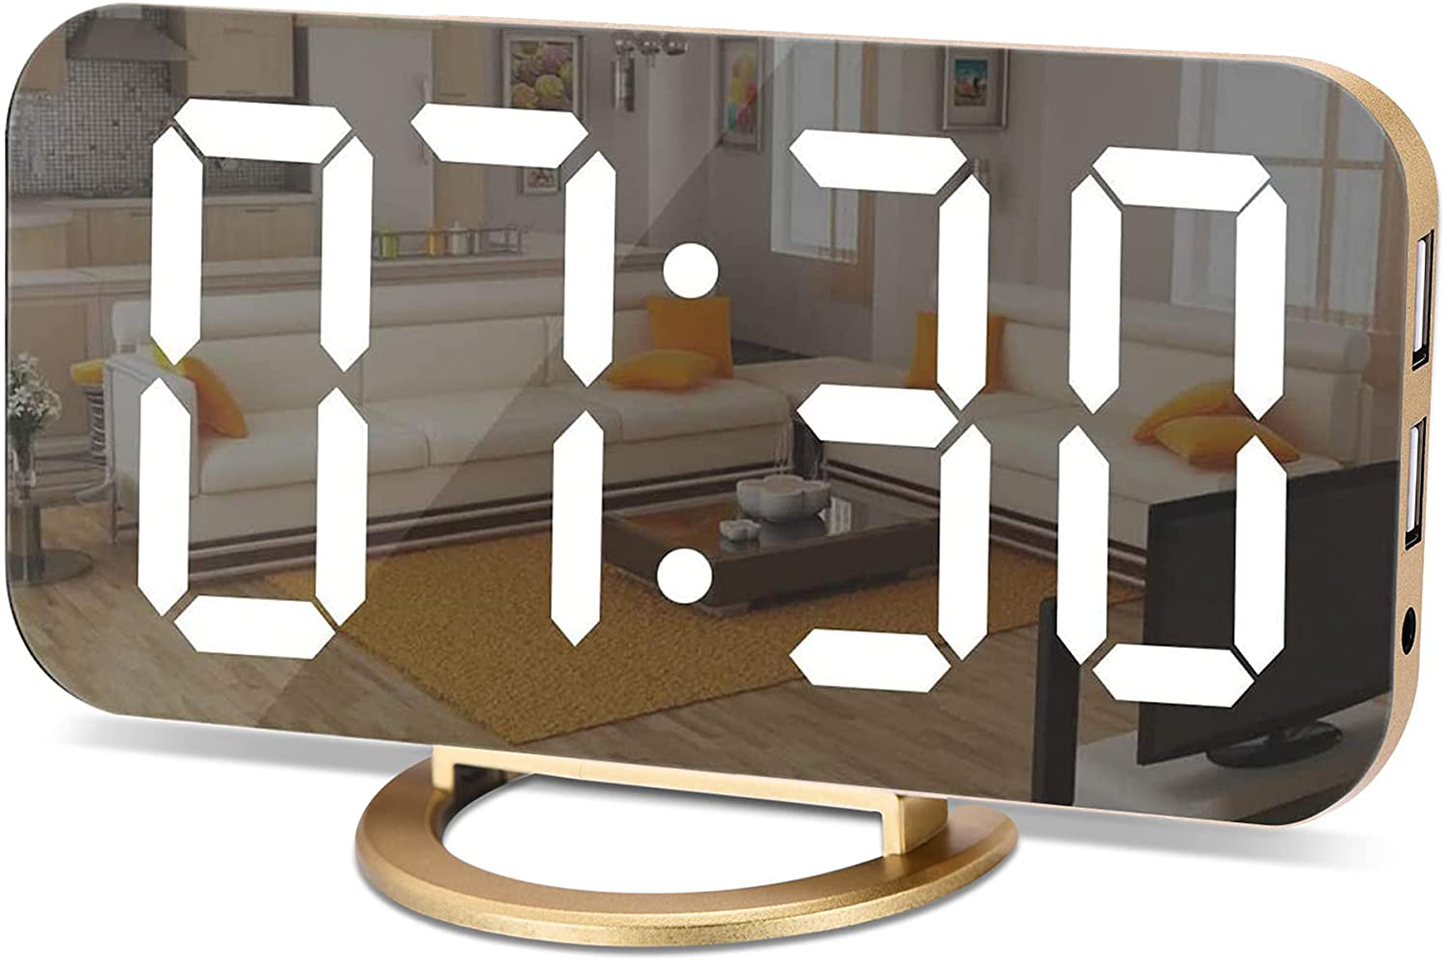 Digital Alarm Clock,LED and Mirror Desk Clock Large Display,with Dual USB Charger Ports,3 Levels Brightness,12/24H,Modern Electronic Clock for Bedroom Home Living Room Office - Gold